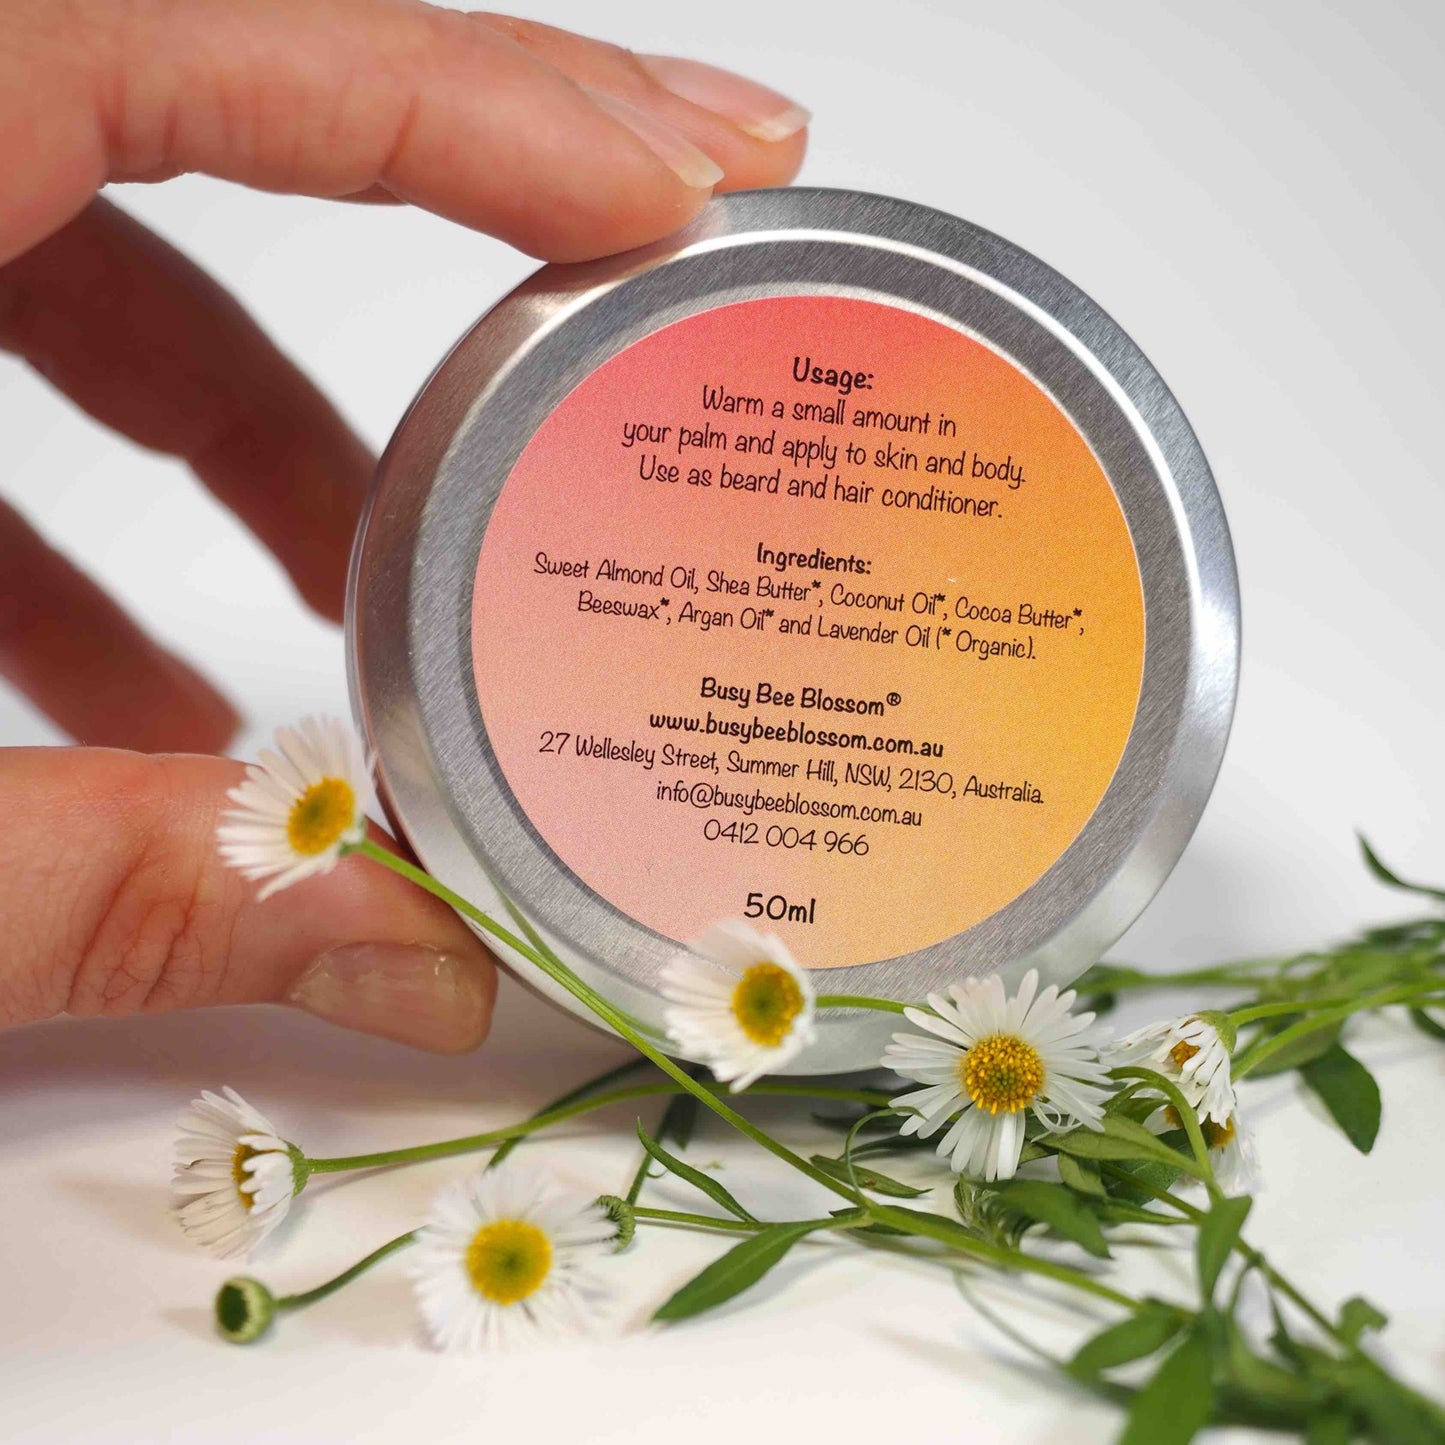 Underside of Organic Lavender Tattoo Balm tin showing ingredients, usage and contact details.